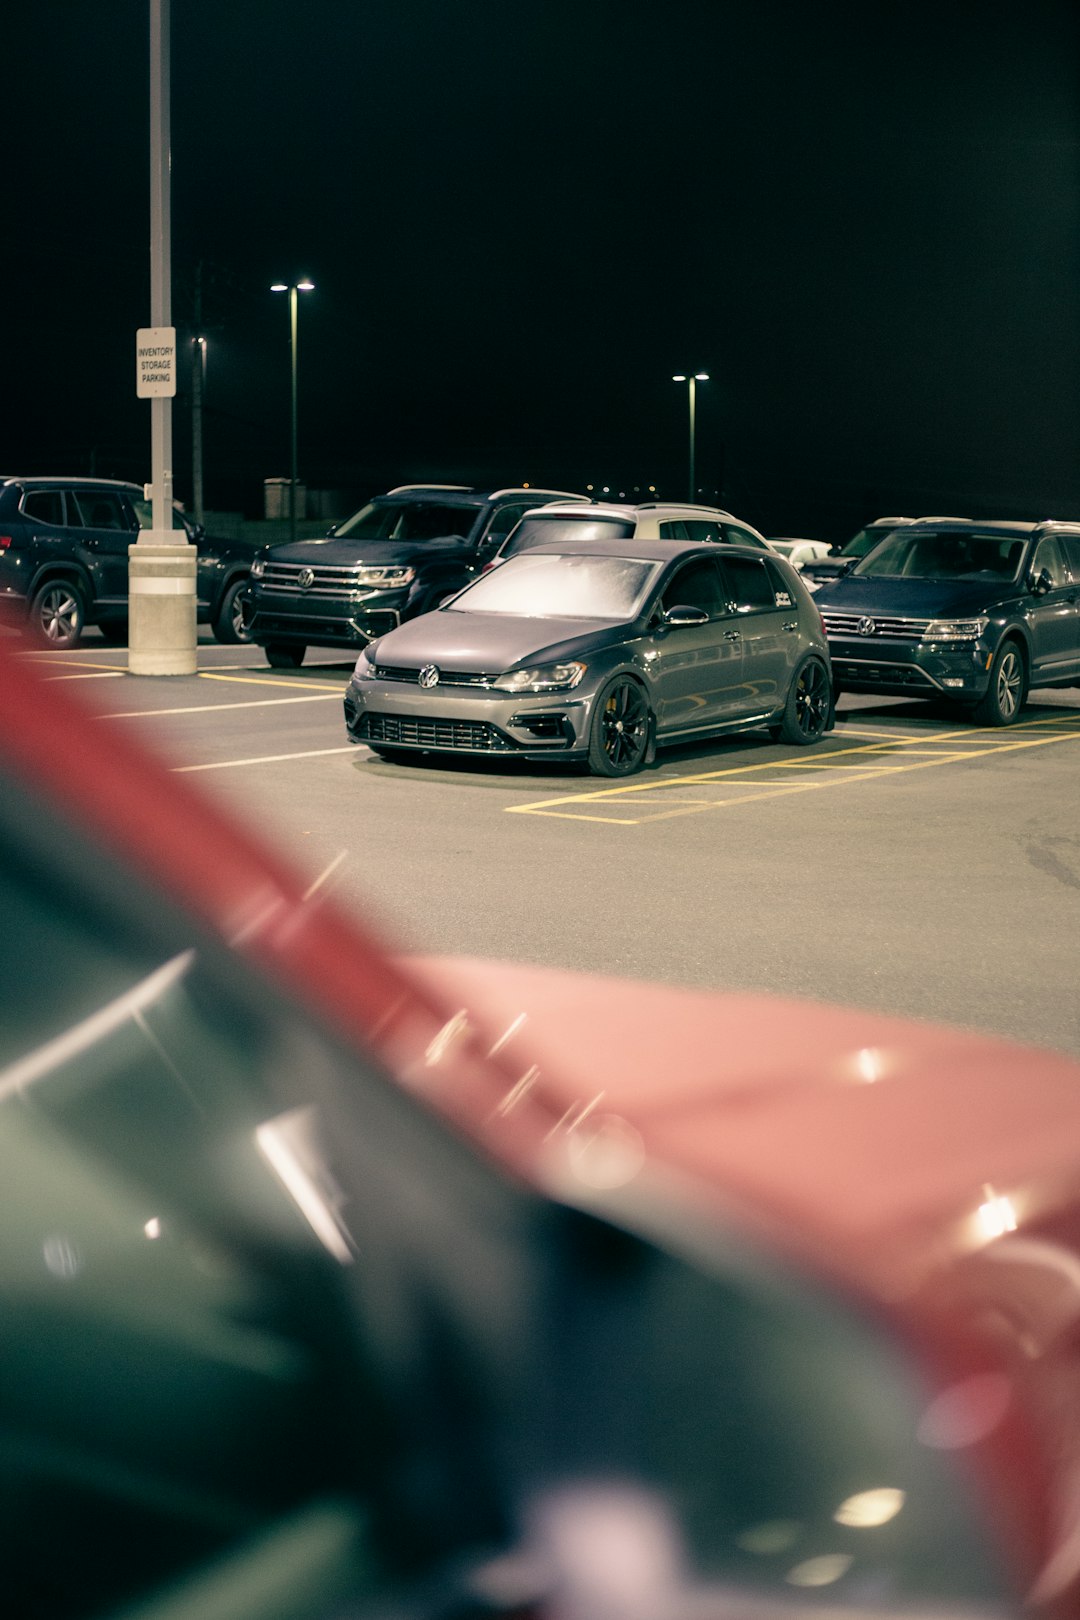 cars parked on parking lot during night time